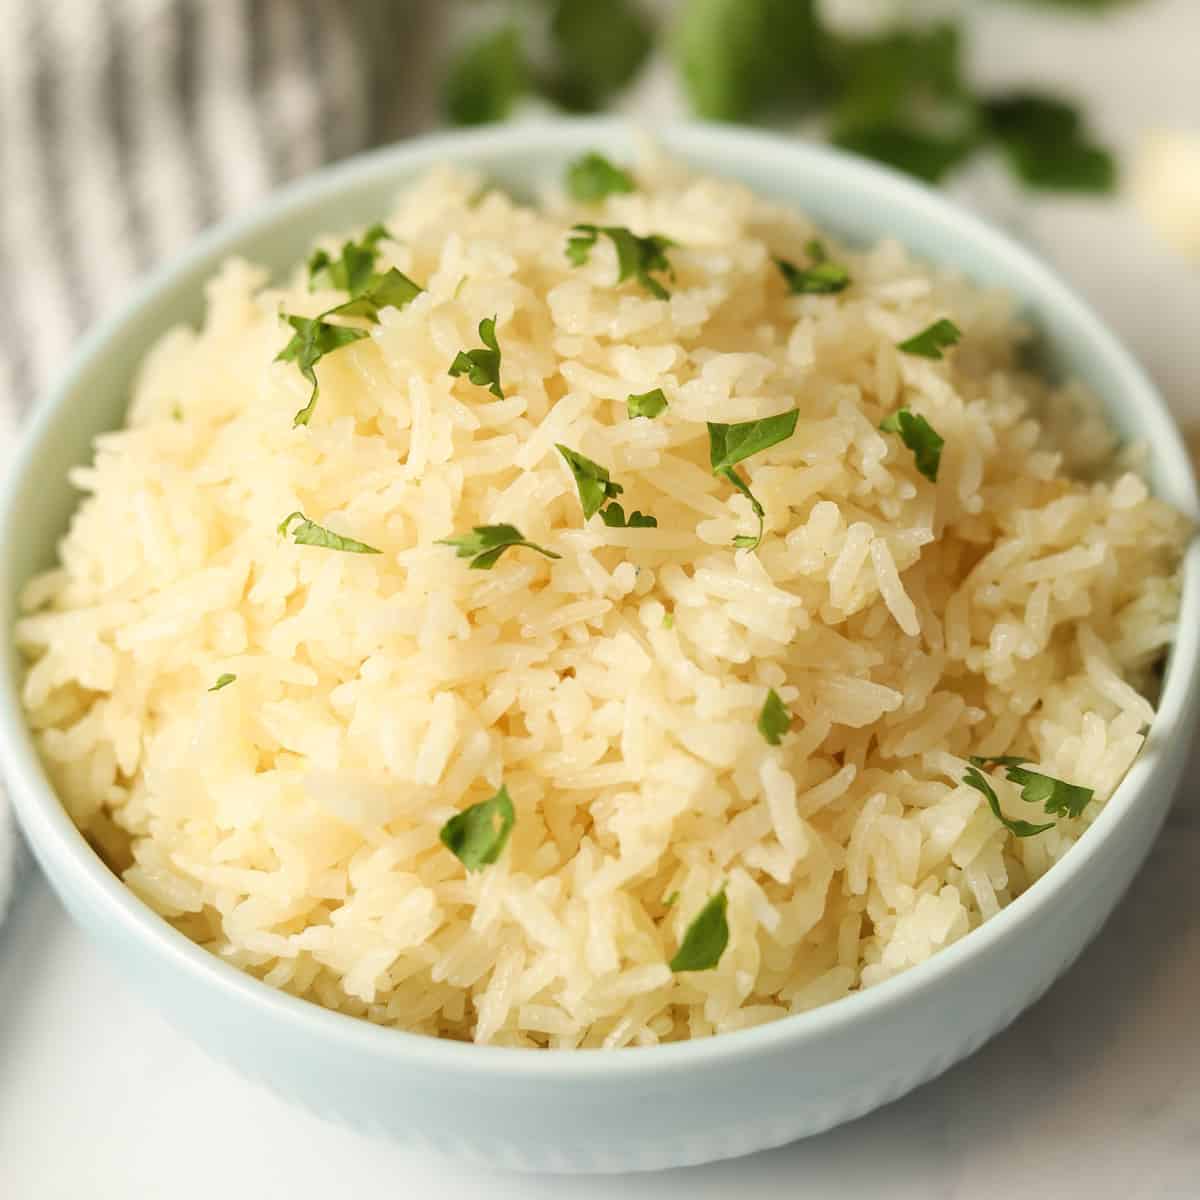 How to Make Perfect White Rice in a Rice Cooker - FoodieZoolee